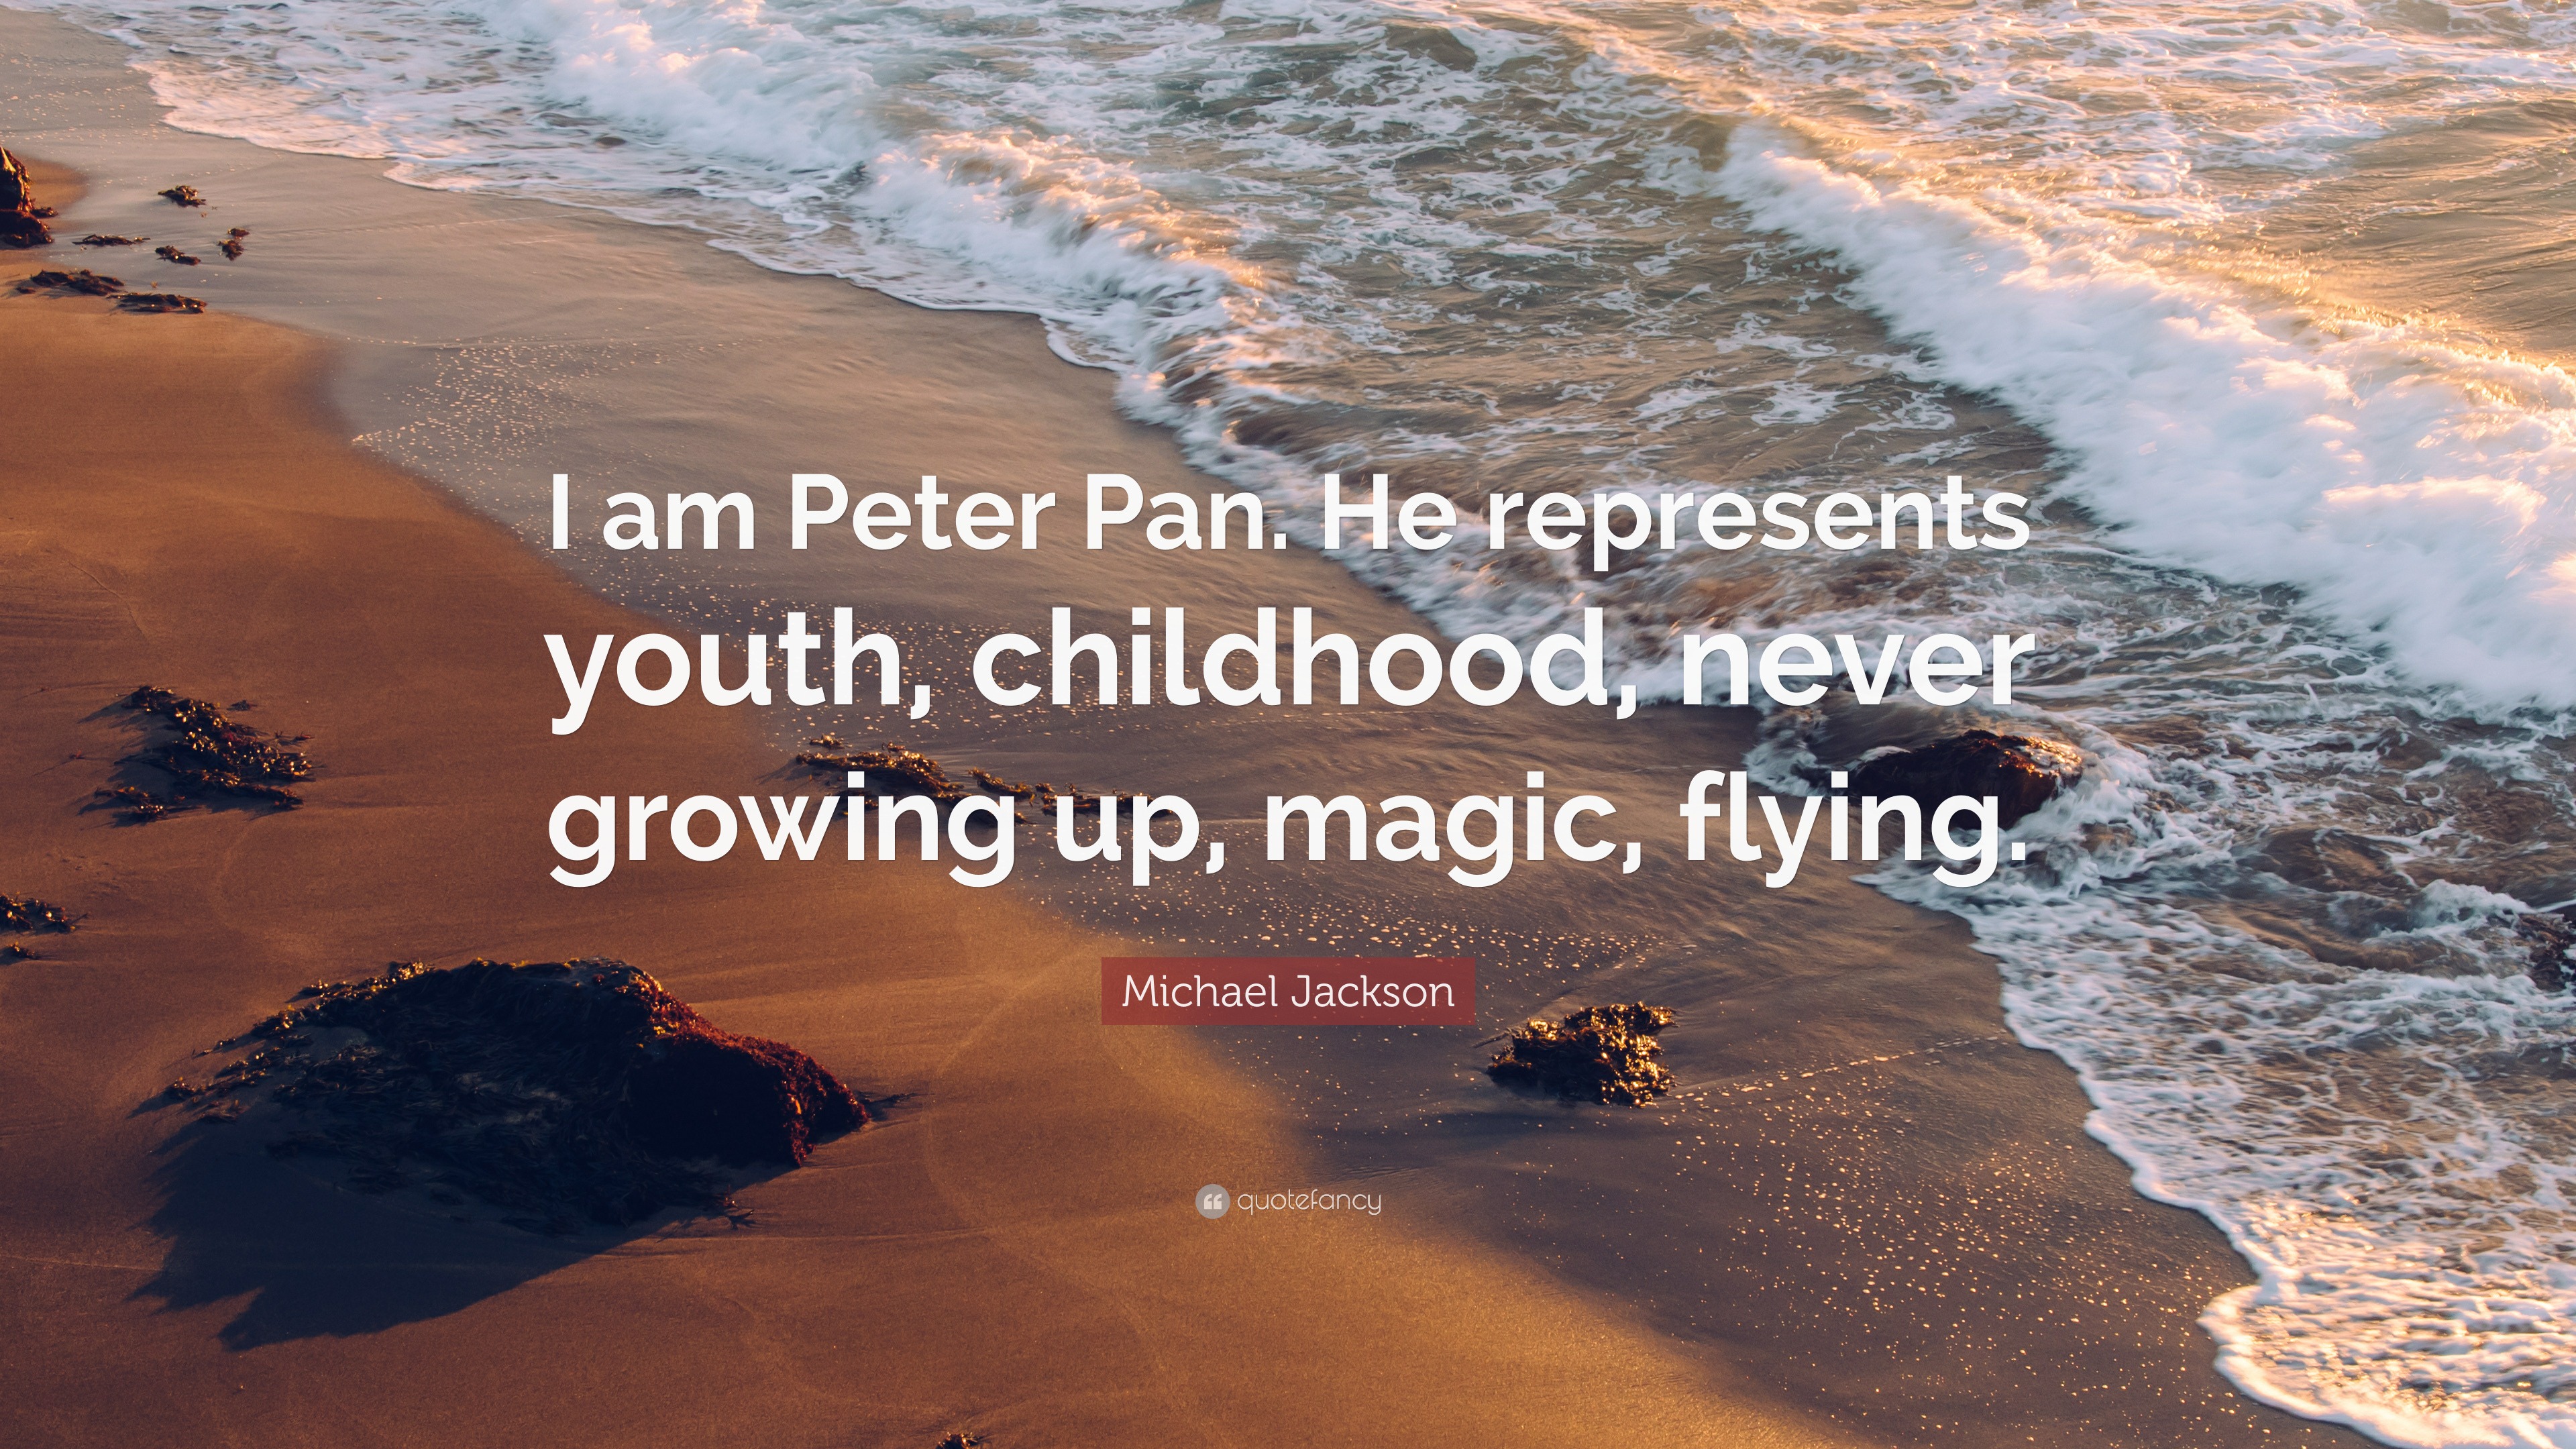 Michael Jackson Quote: “I am Peter Pan. He represents youth, childhood